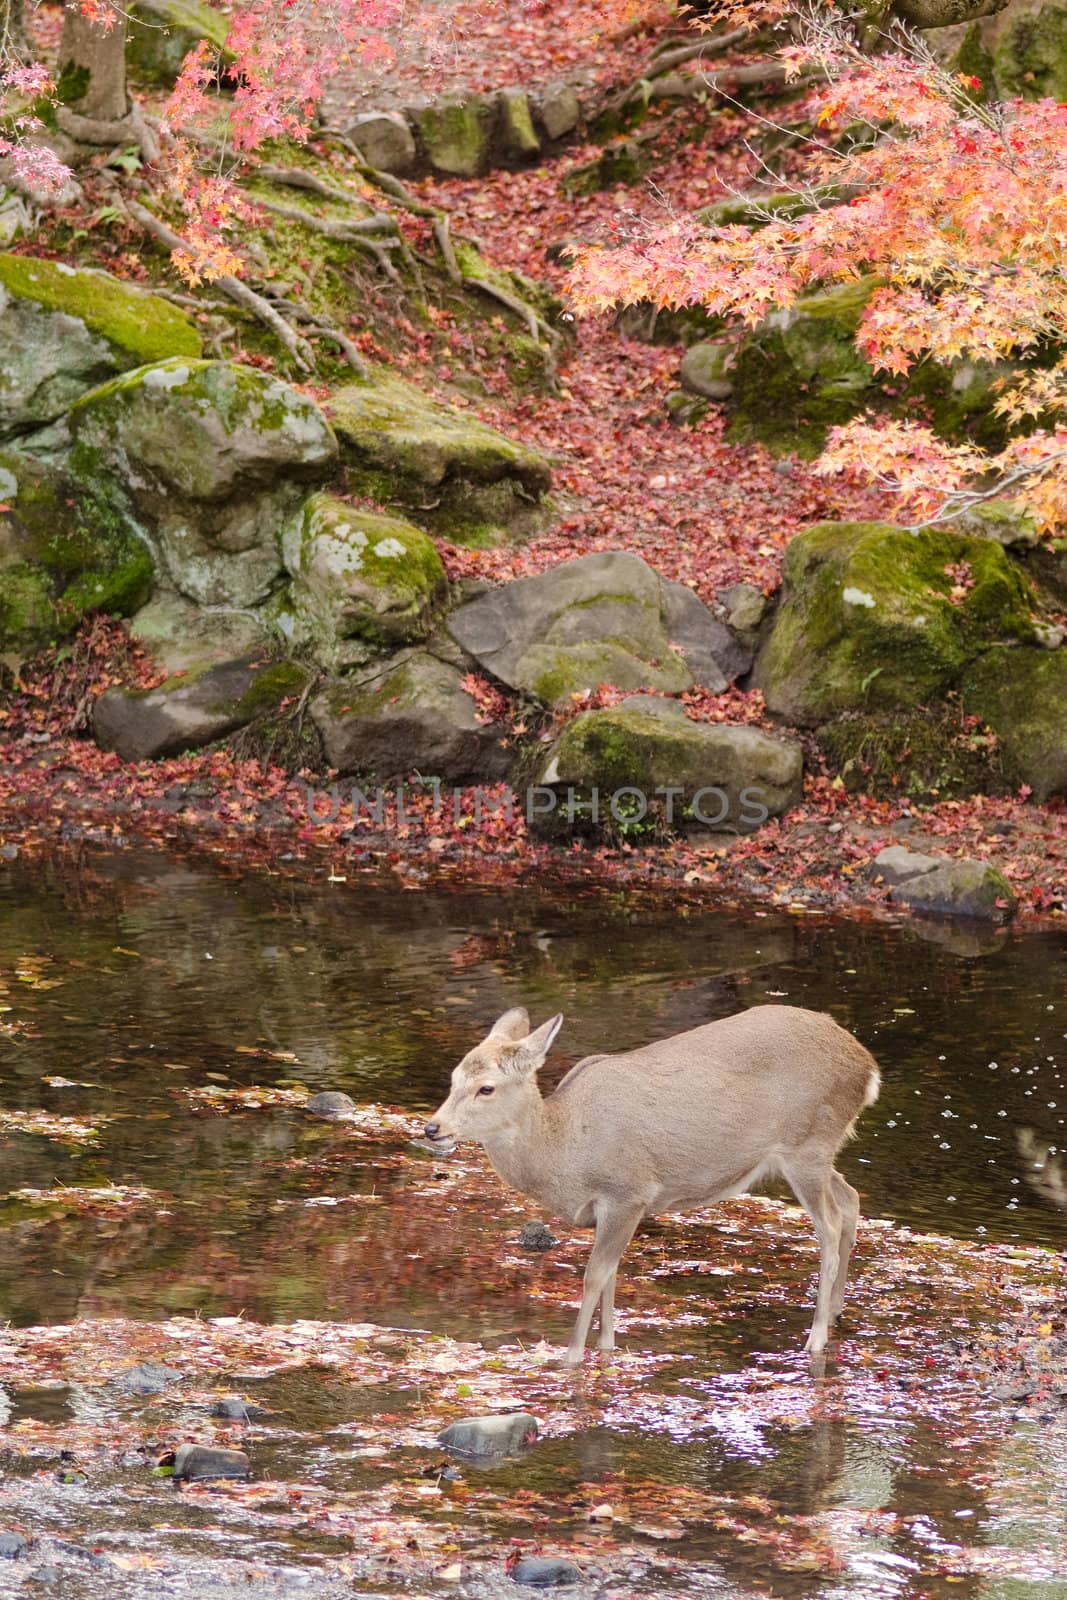 Sika deer drinking water in autumn by Arrxxx